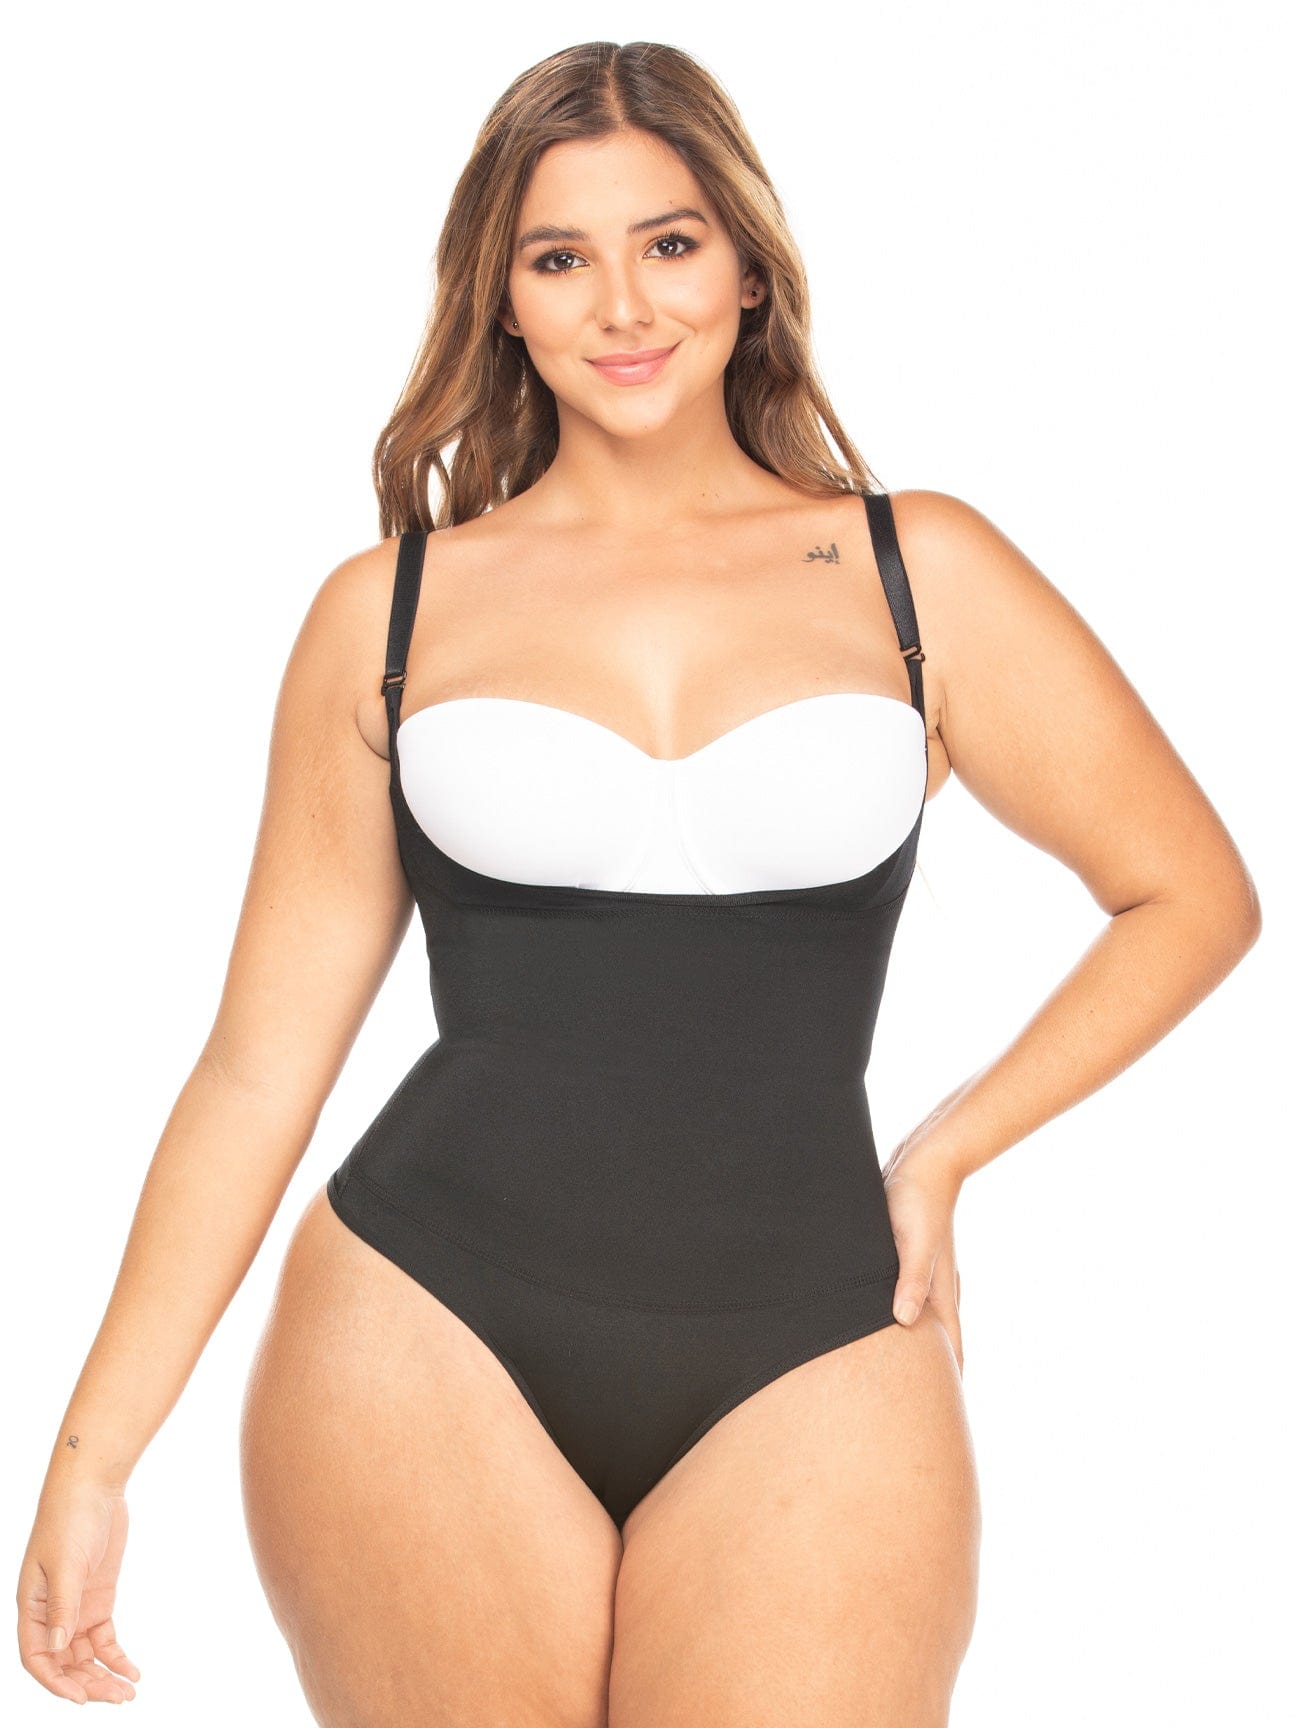 Premium Colombian Shapewear Fajas Colombianas Mujer para Bajar de Peso Body  Suit for women Moderate Compression Flat seams prevent chafing sculpt torso  Firm Buttocks Sport Short won't roll down 